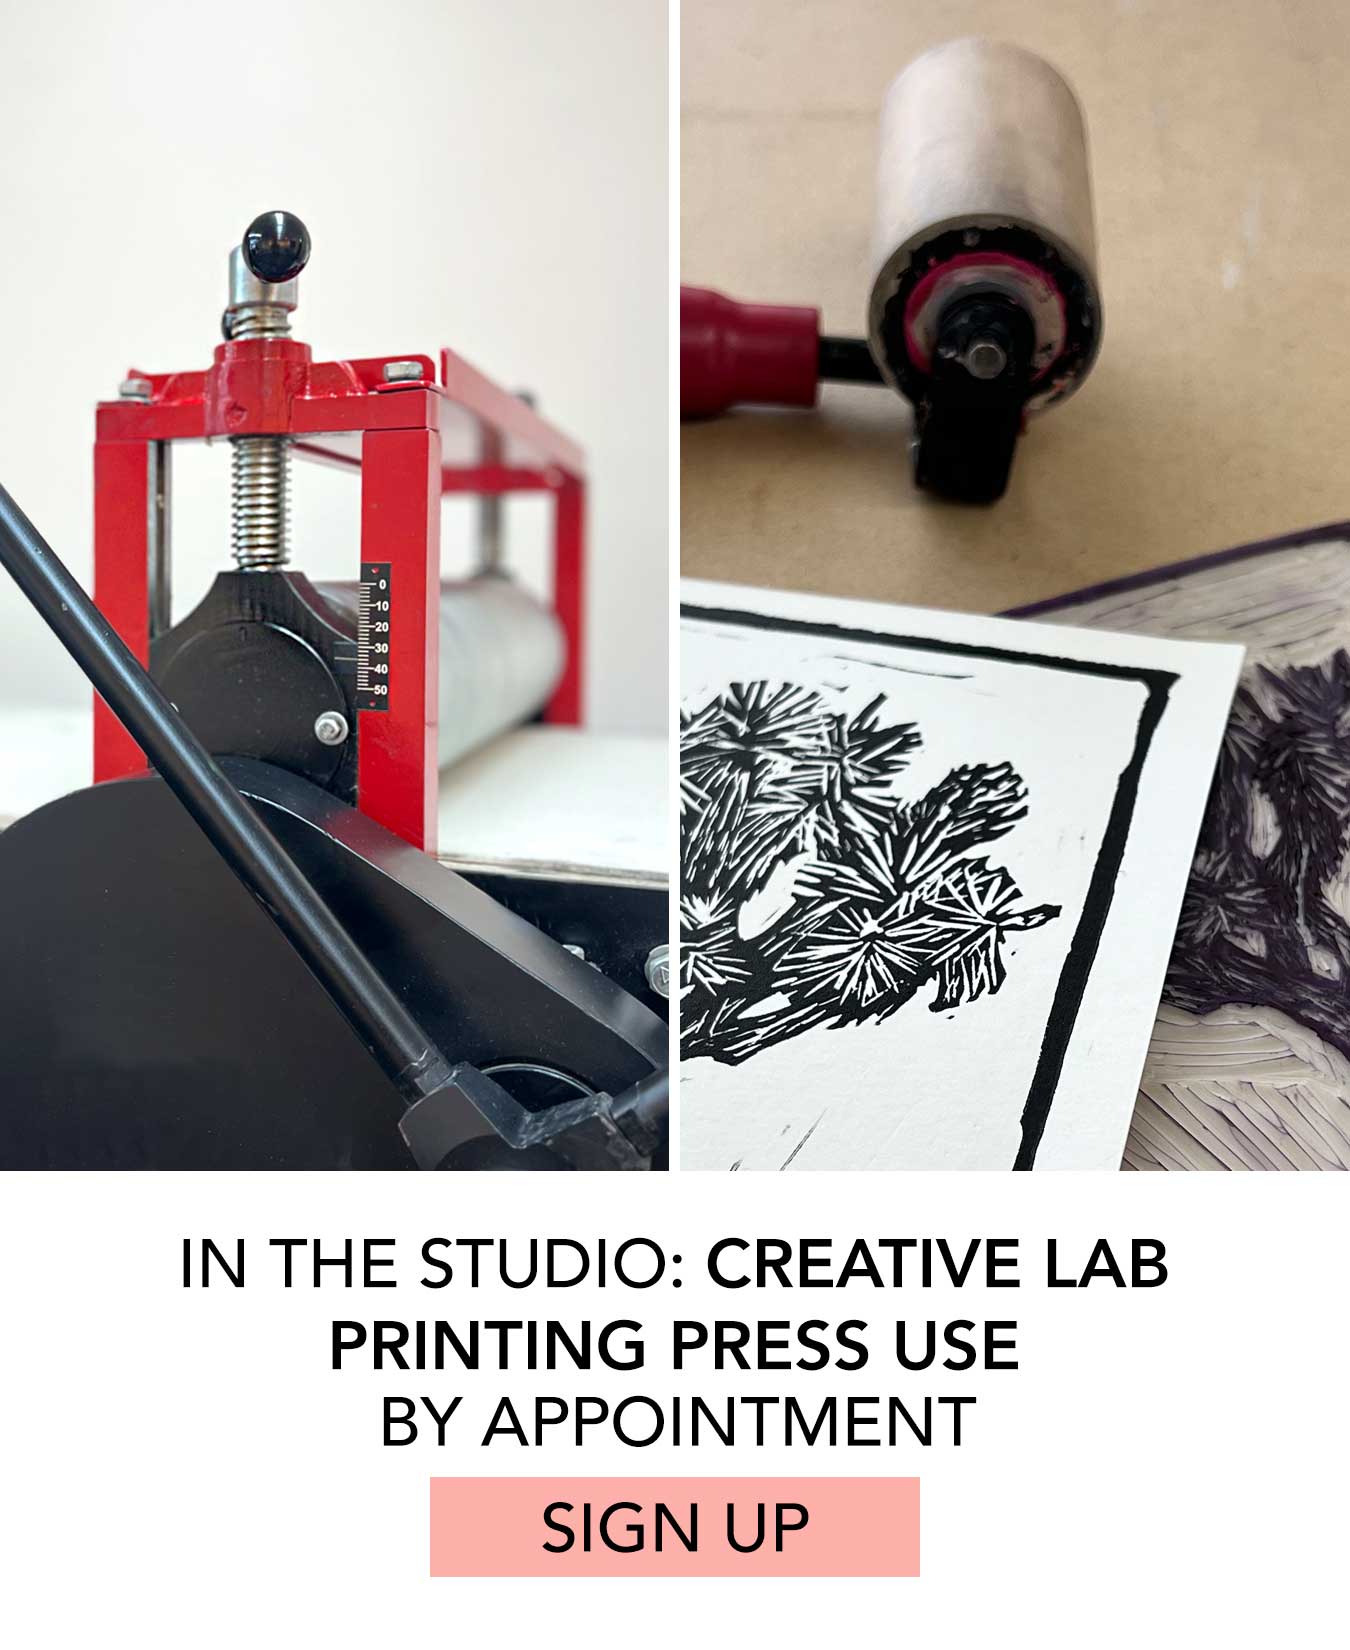 In Studio: Creative Lab Printing Press Use. Click to Sign Up.